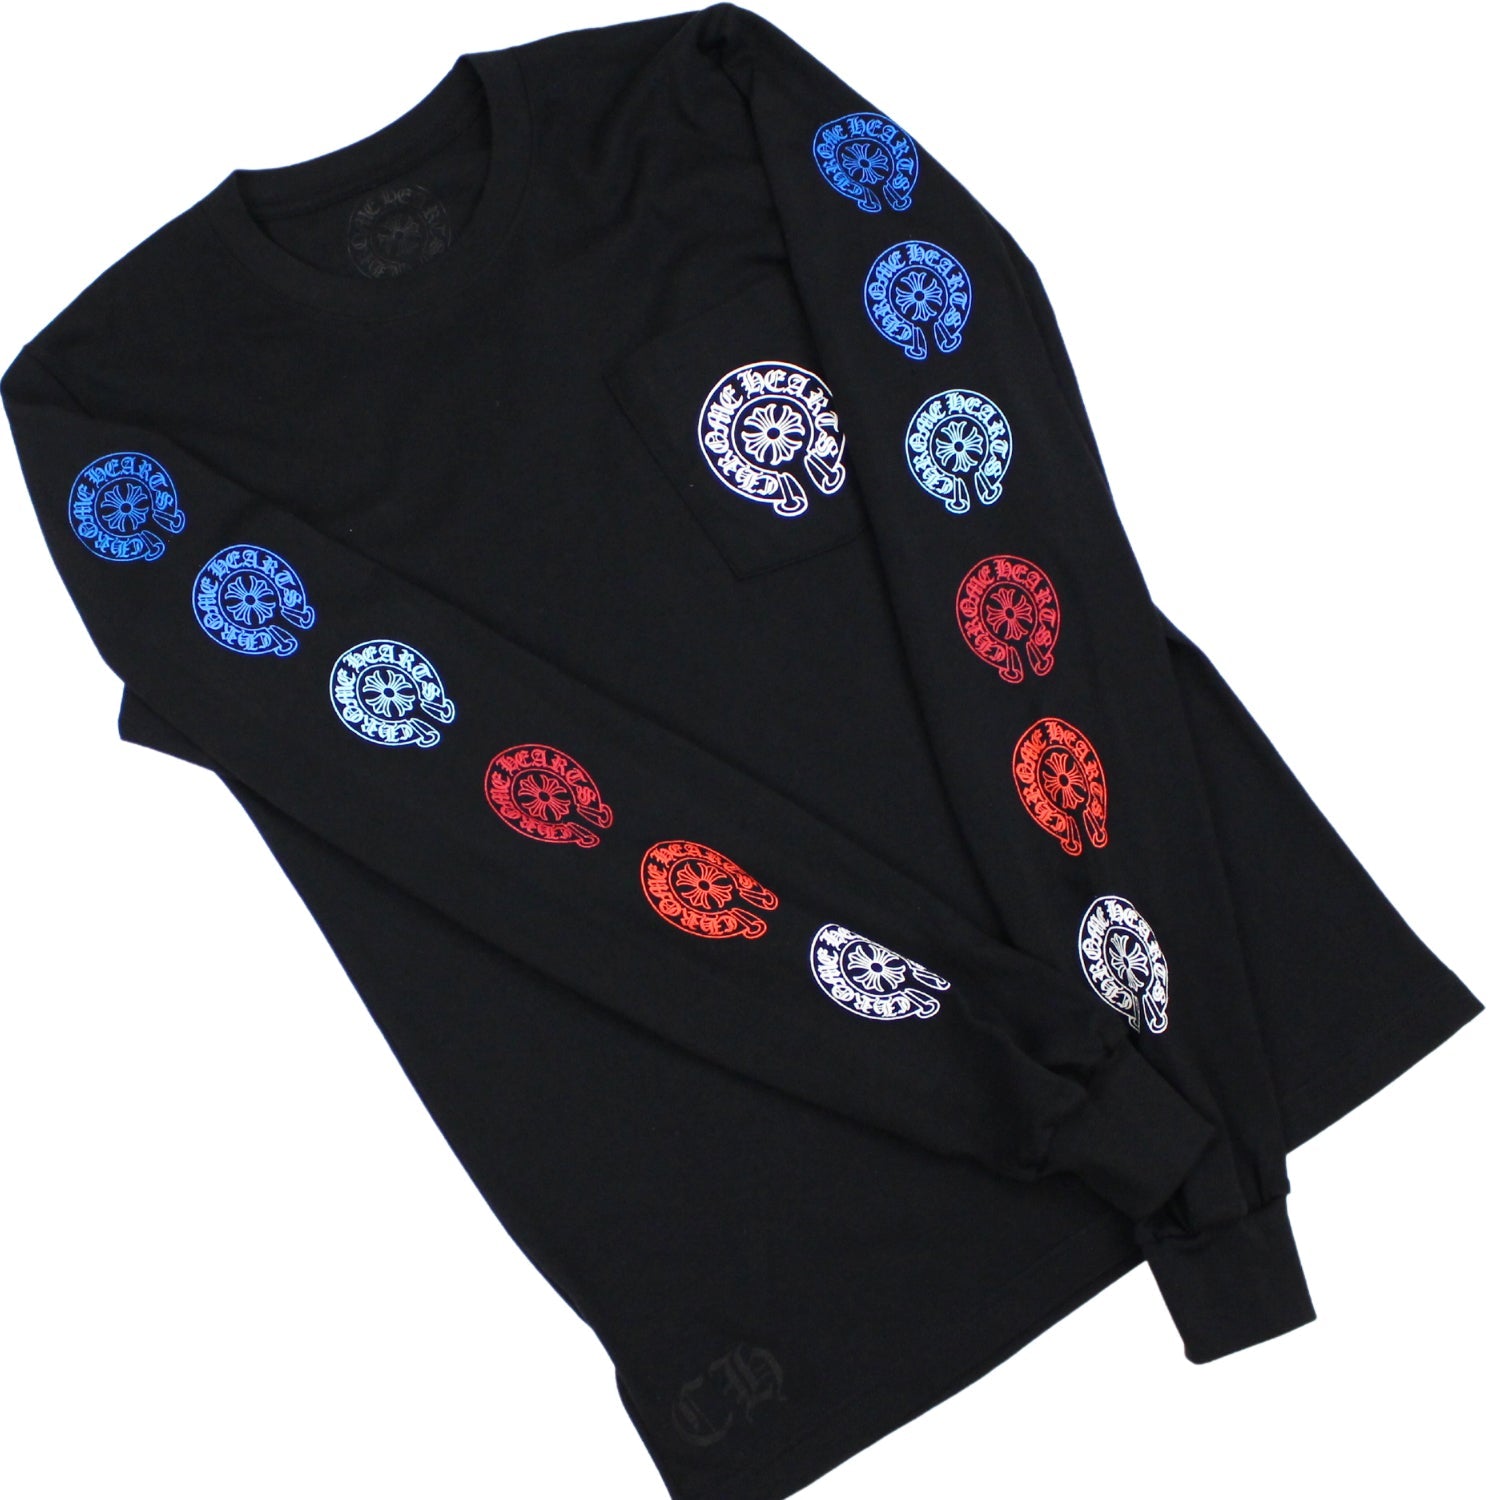 CHROME HEARTS – Crown Forever  Long sleeve tshirt, Chrome hearts, Long  sleeve tshirt men